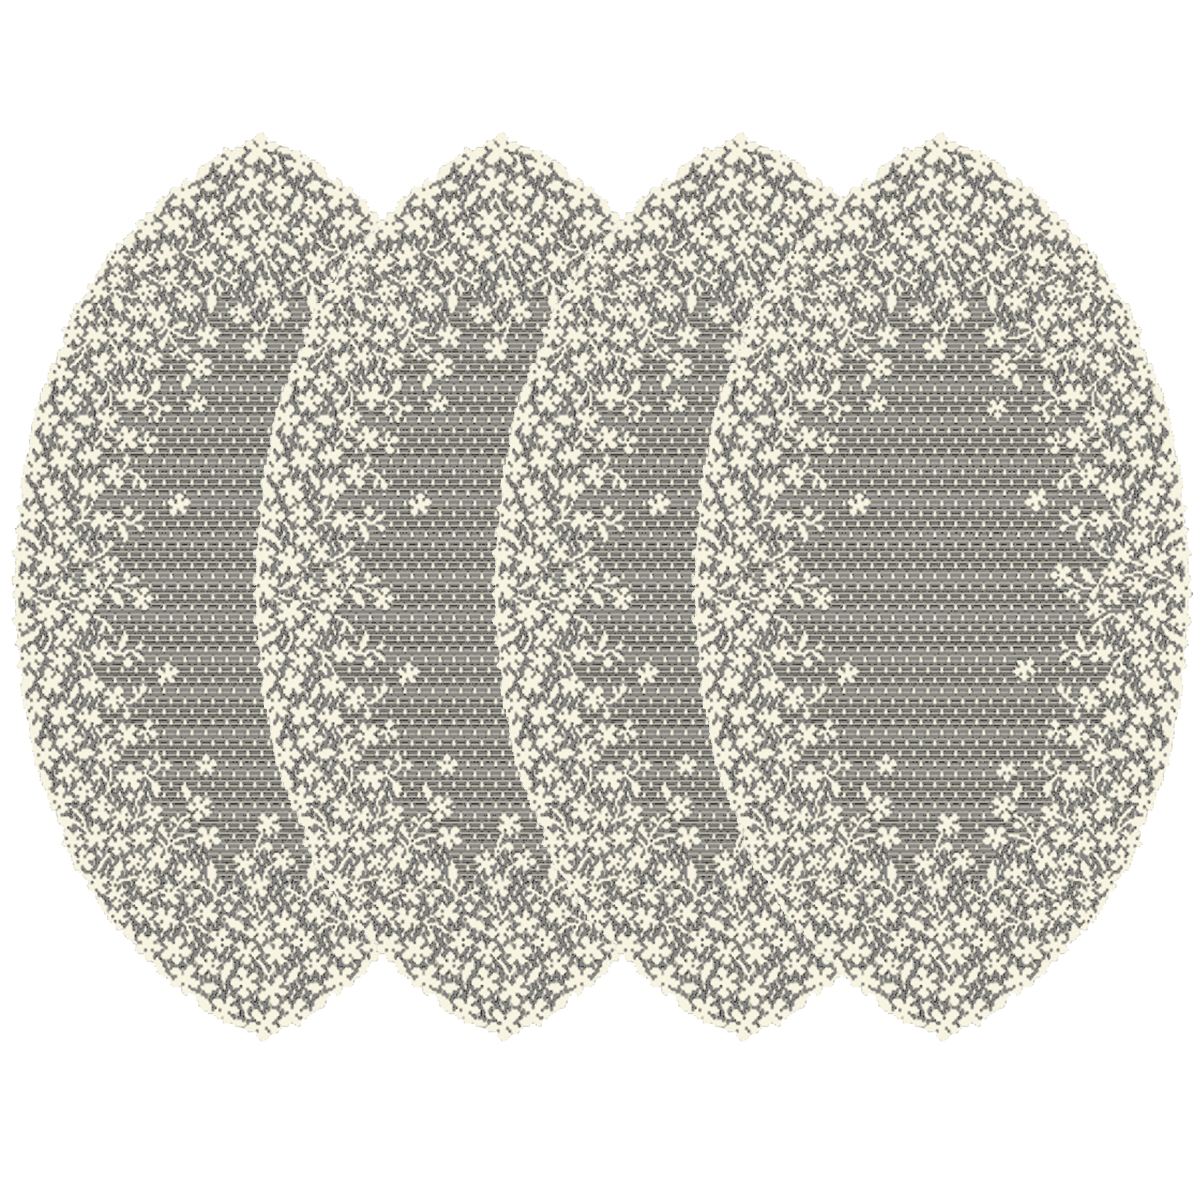 Picture of Heritage Lace BL-1222E-S 12 x 22 in. Blossom Doilies, Ecru - Set of 4